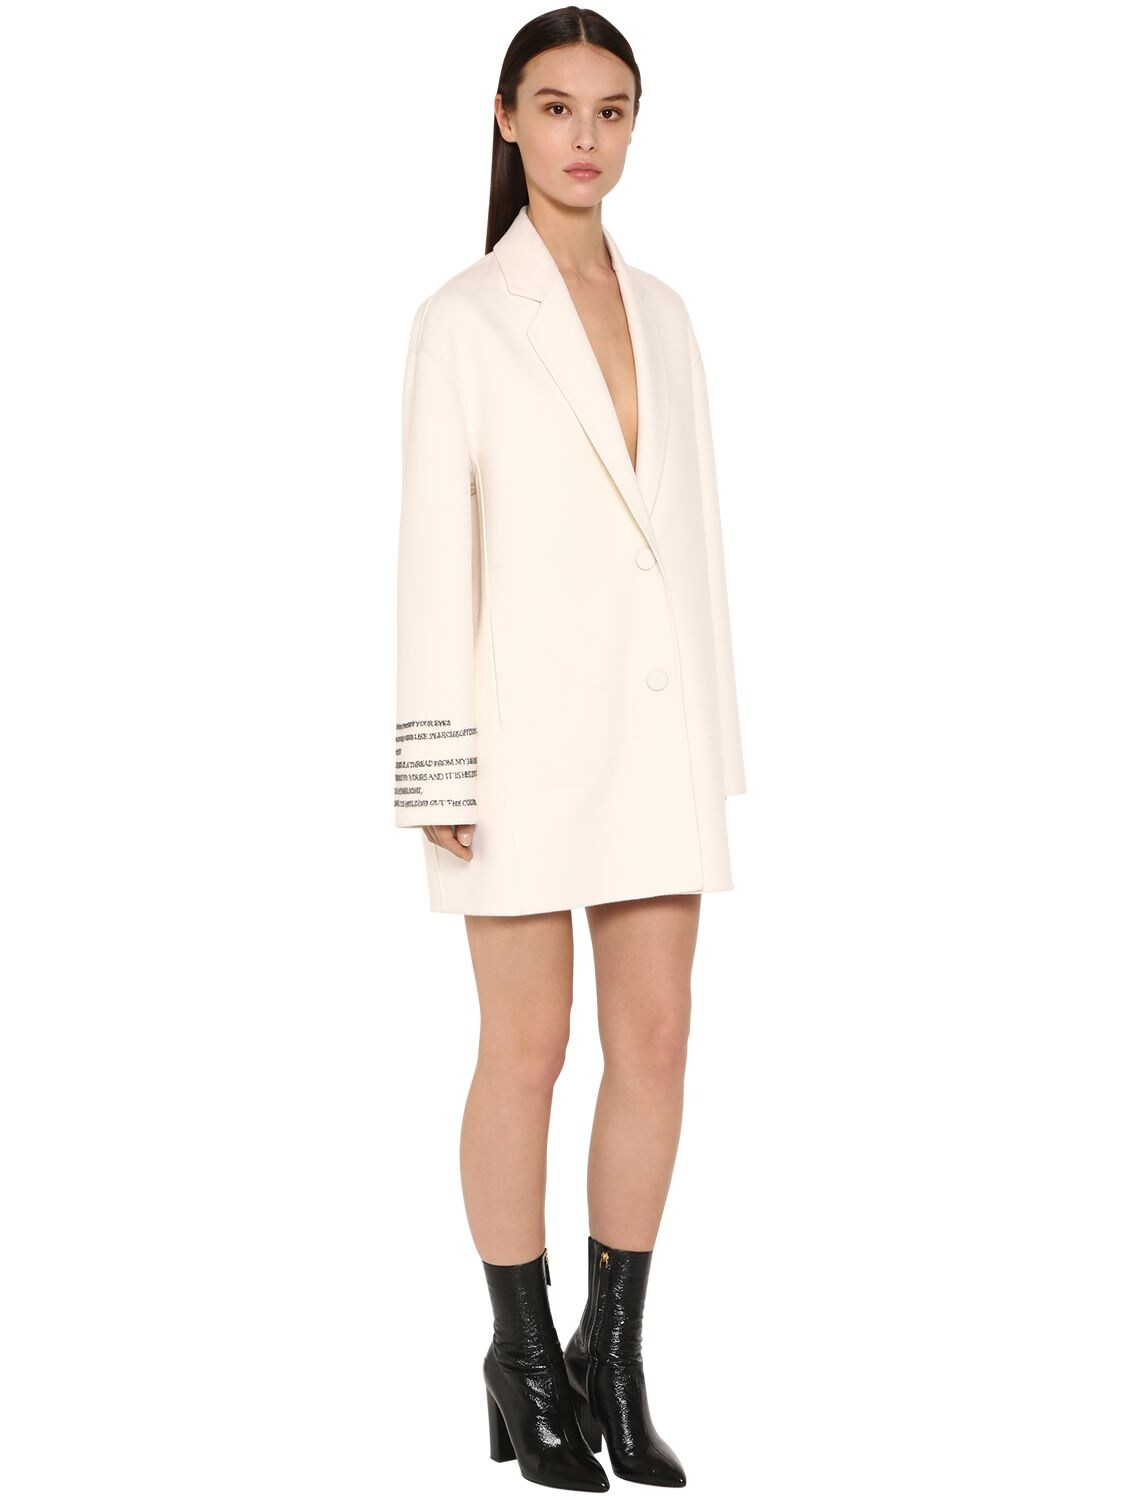 VALENTINO EMBROIDERED COMPACT SHORT COAT,70IAE6022-QTAZ0